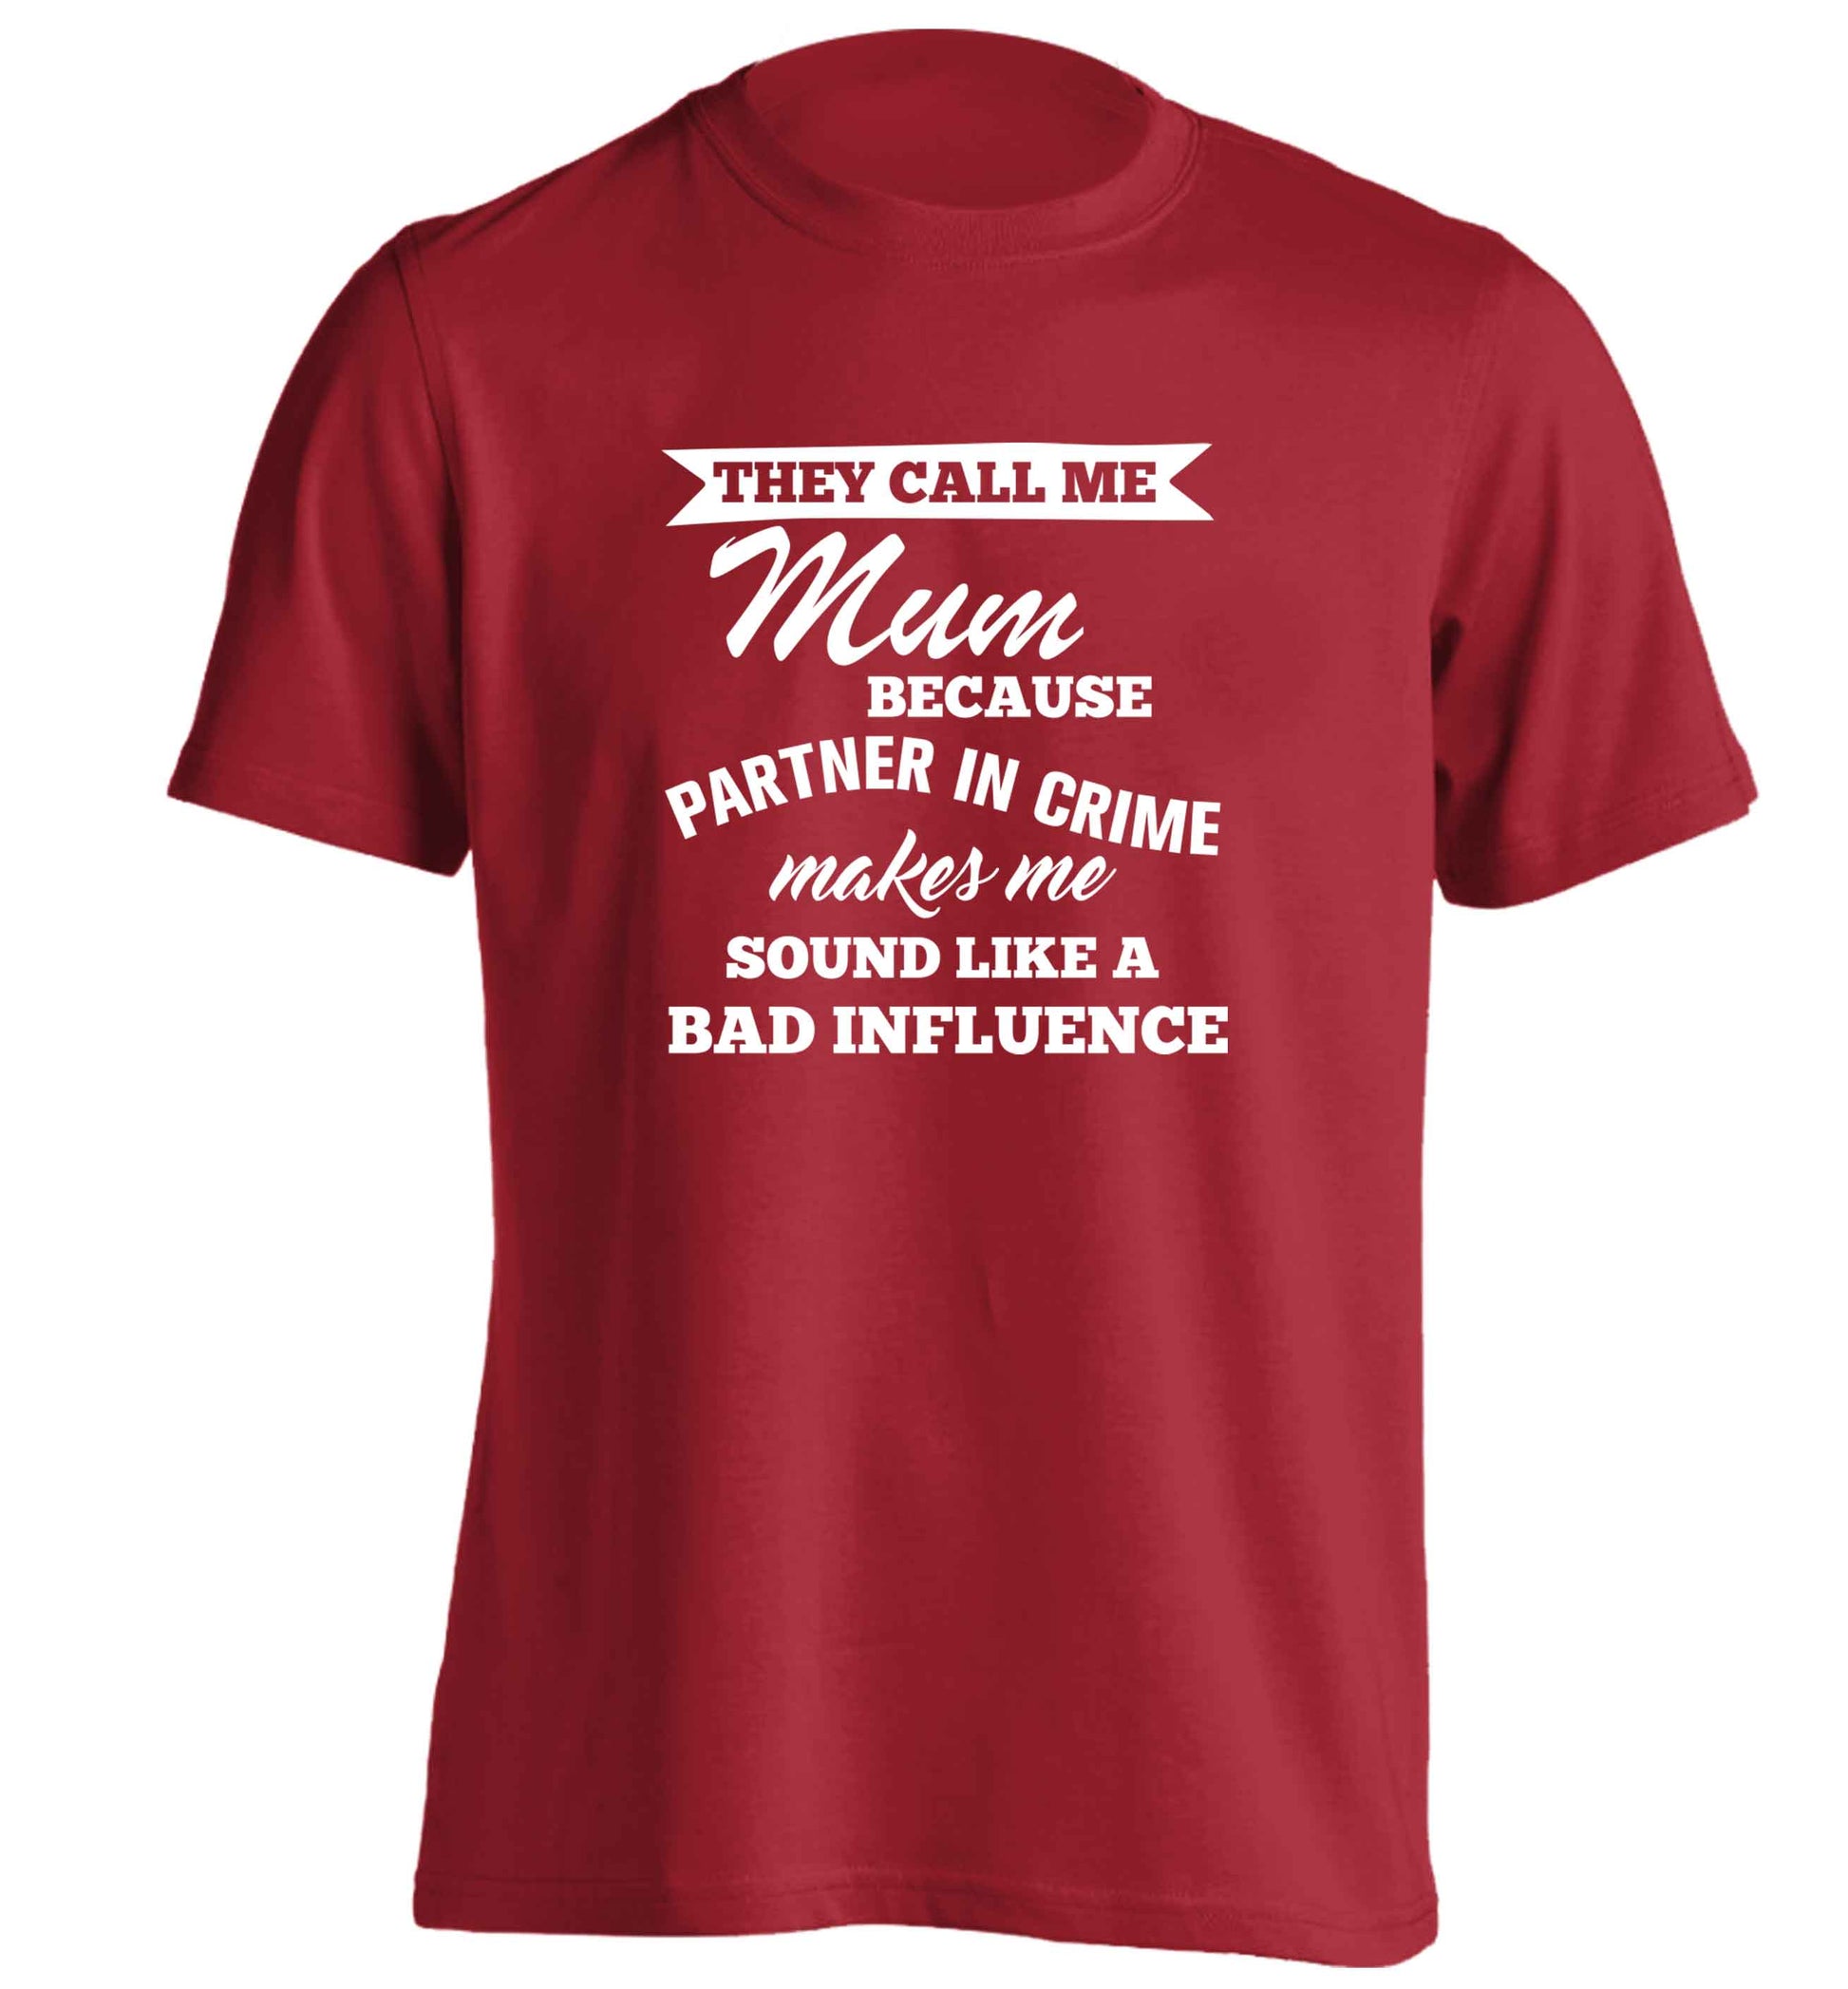 They call me mum because partner in crime makes me sound like a bad influence adults unisex red Tshirt 2XL